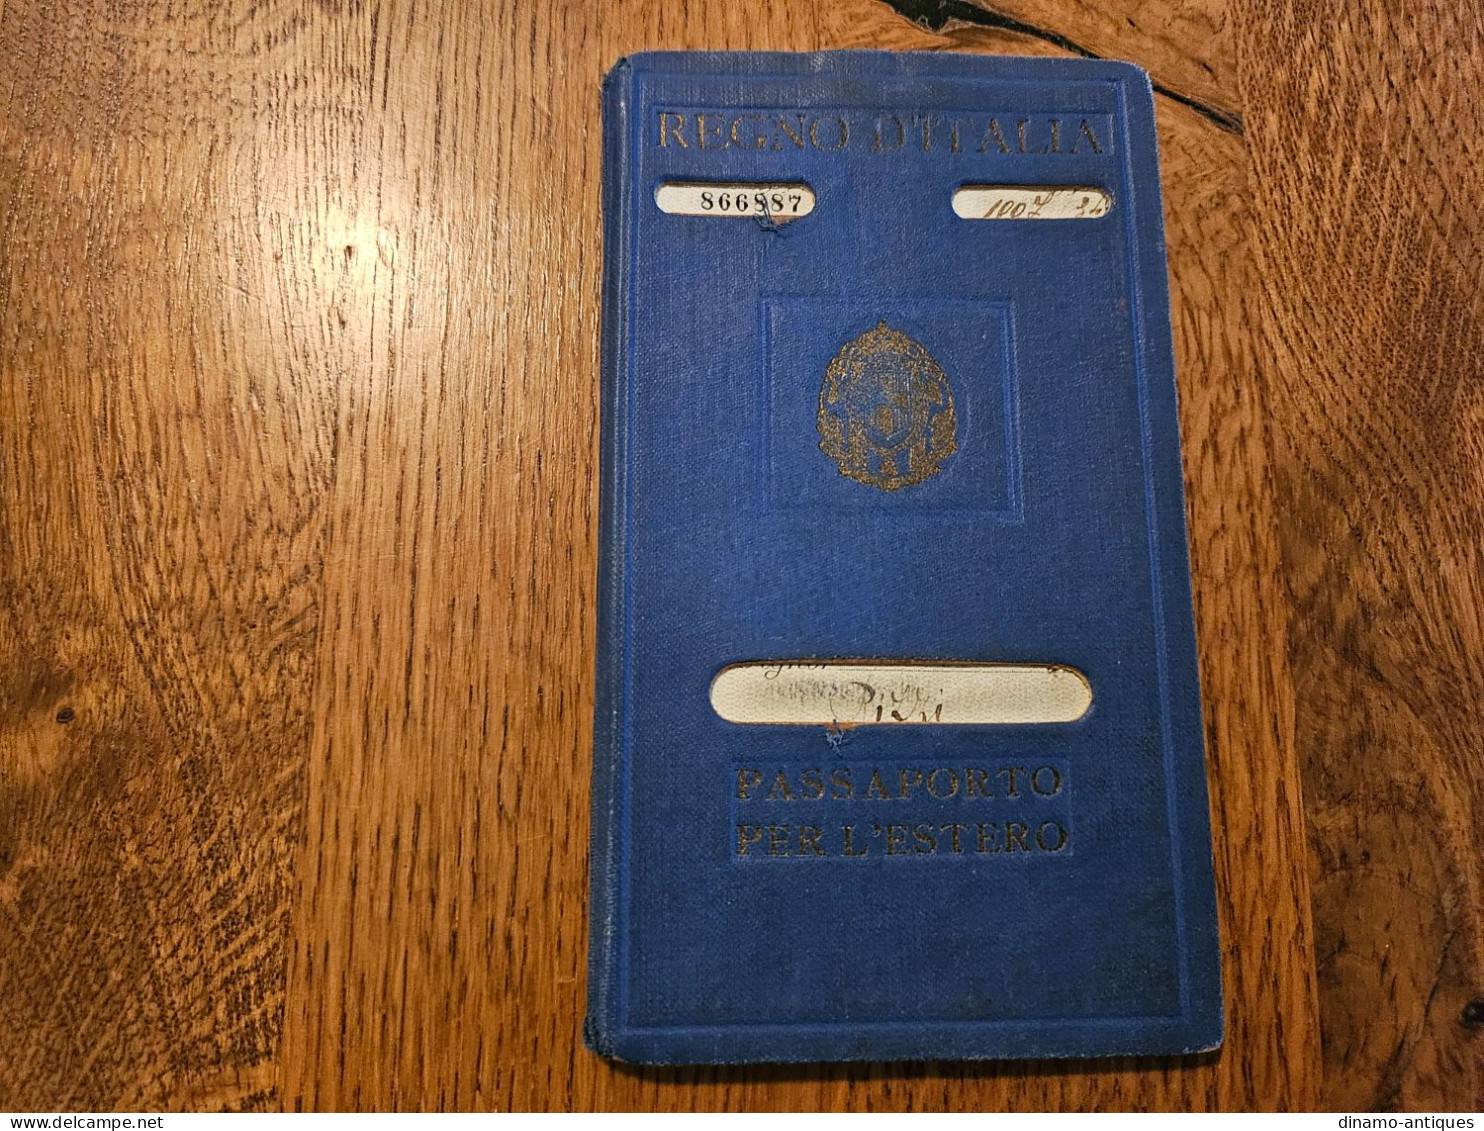 1939 Italy Passport Passeport Issued In Rome - Travel To France United Kingdom - Documenti Storici